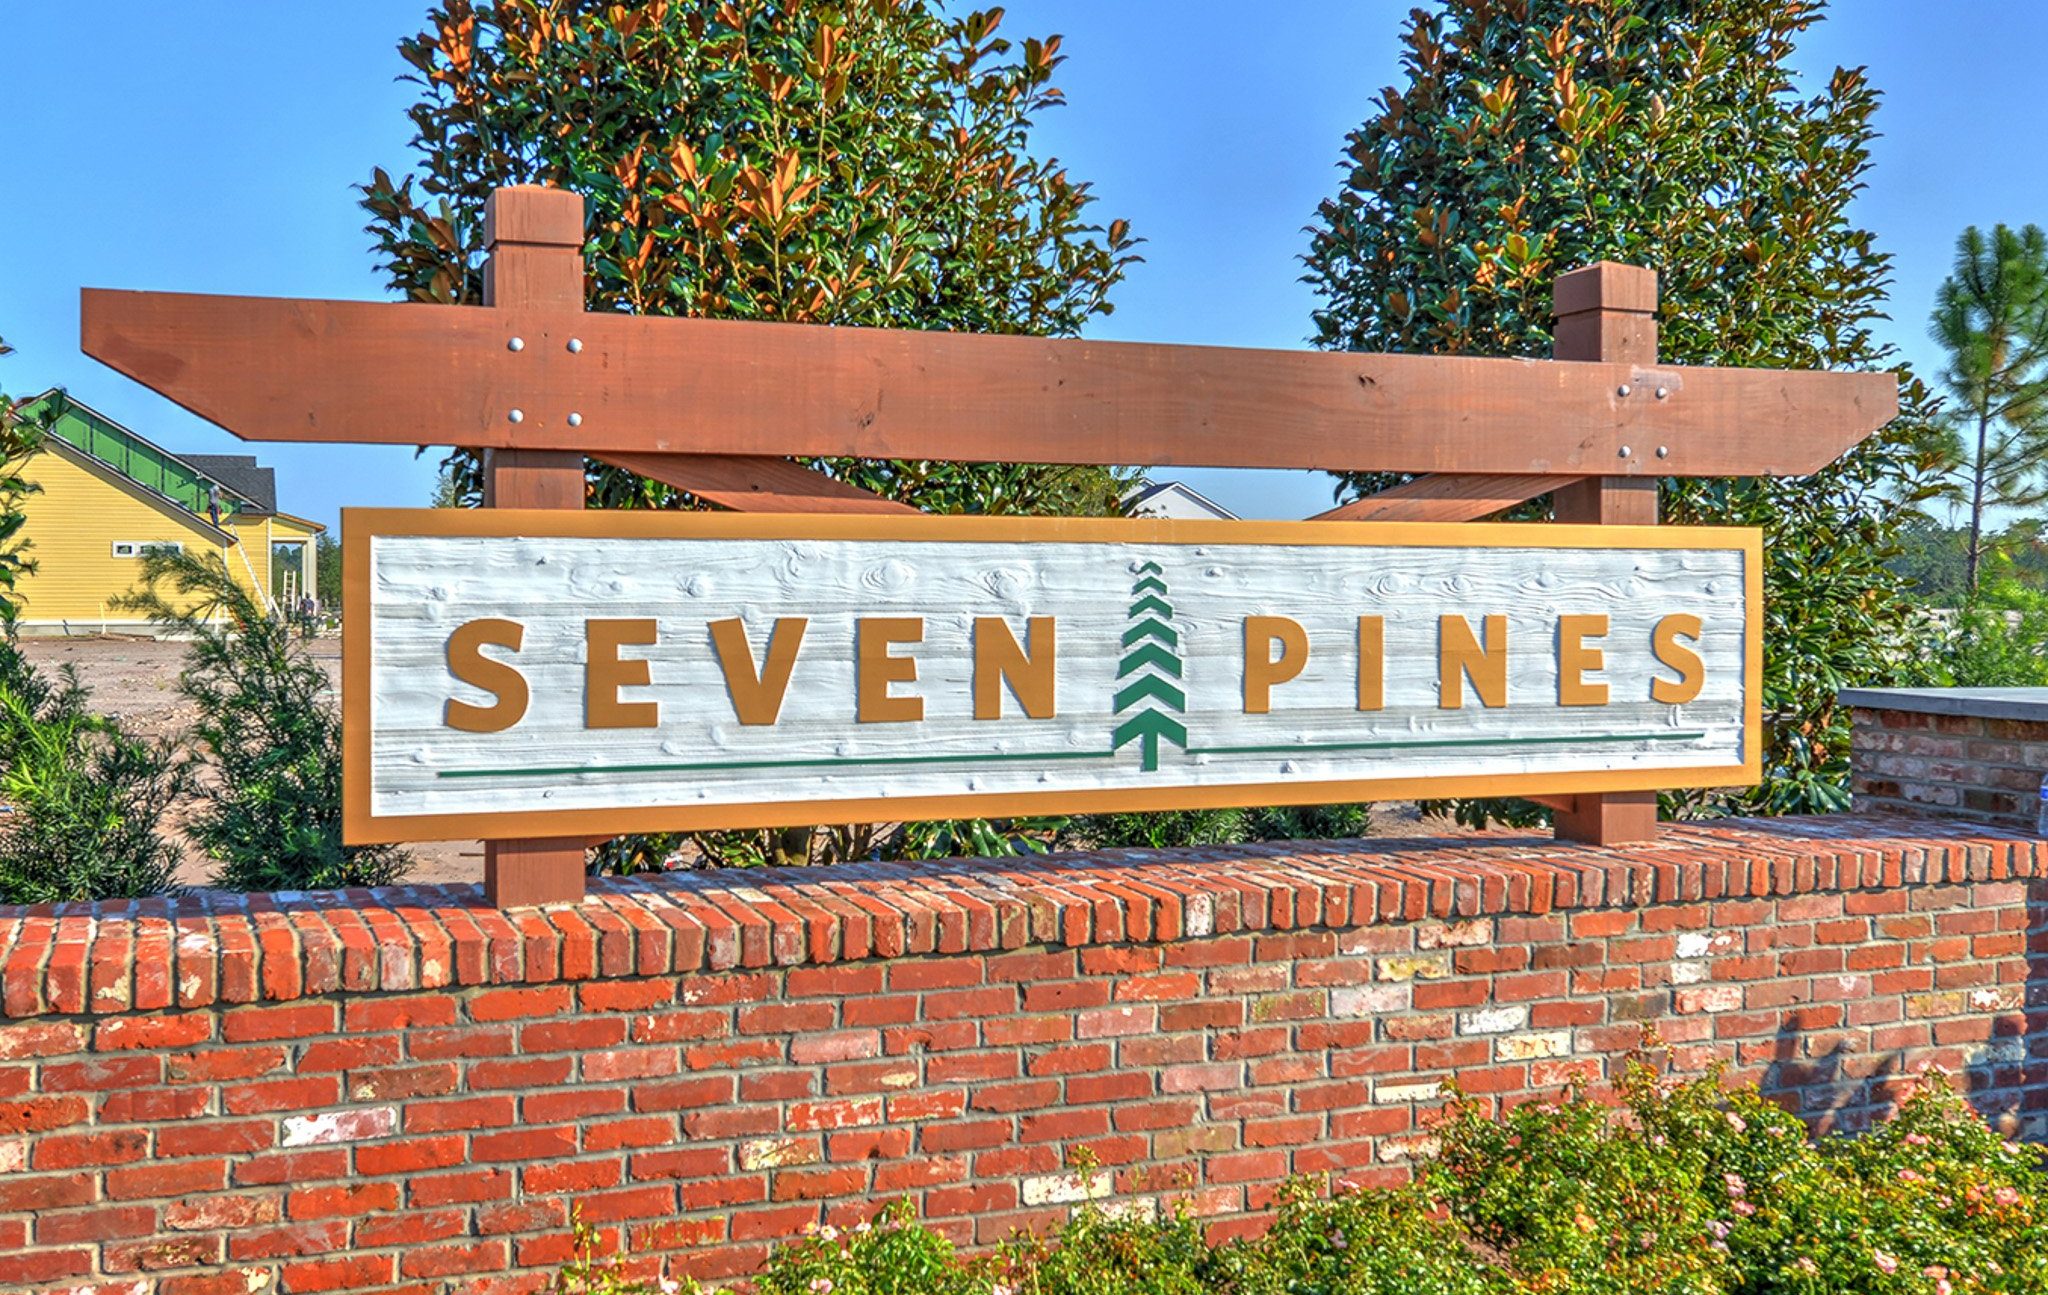 Seven Pines honored as one of the Top Five Master-Planned Communities in the USA - ICI Signs 7Pines Entry Photo e1677070699803